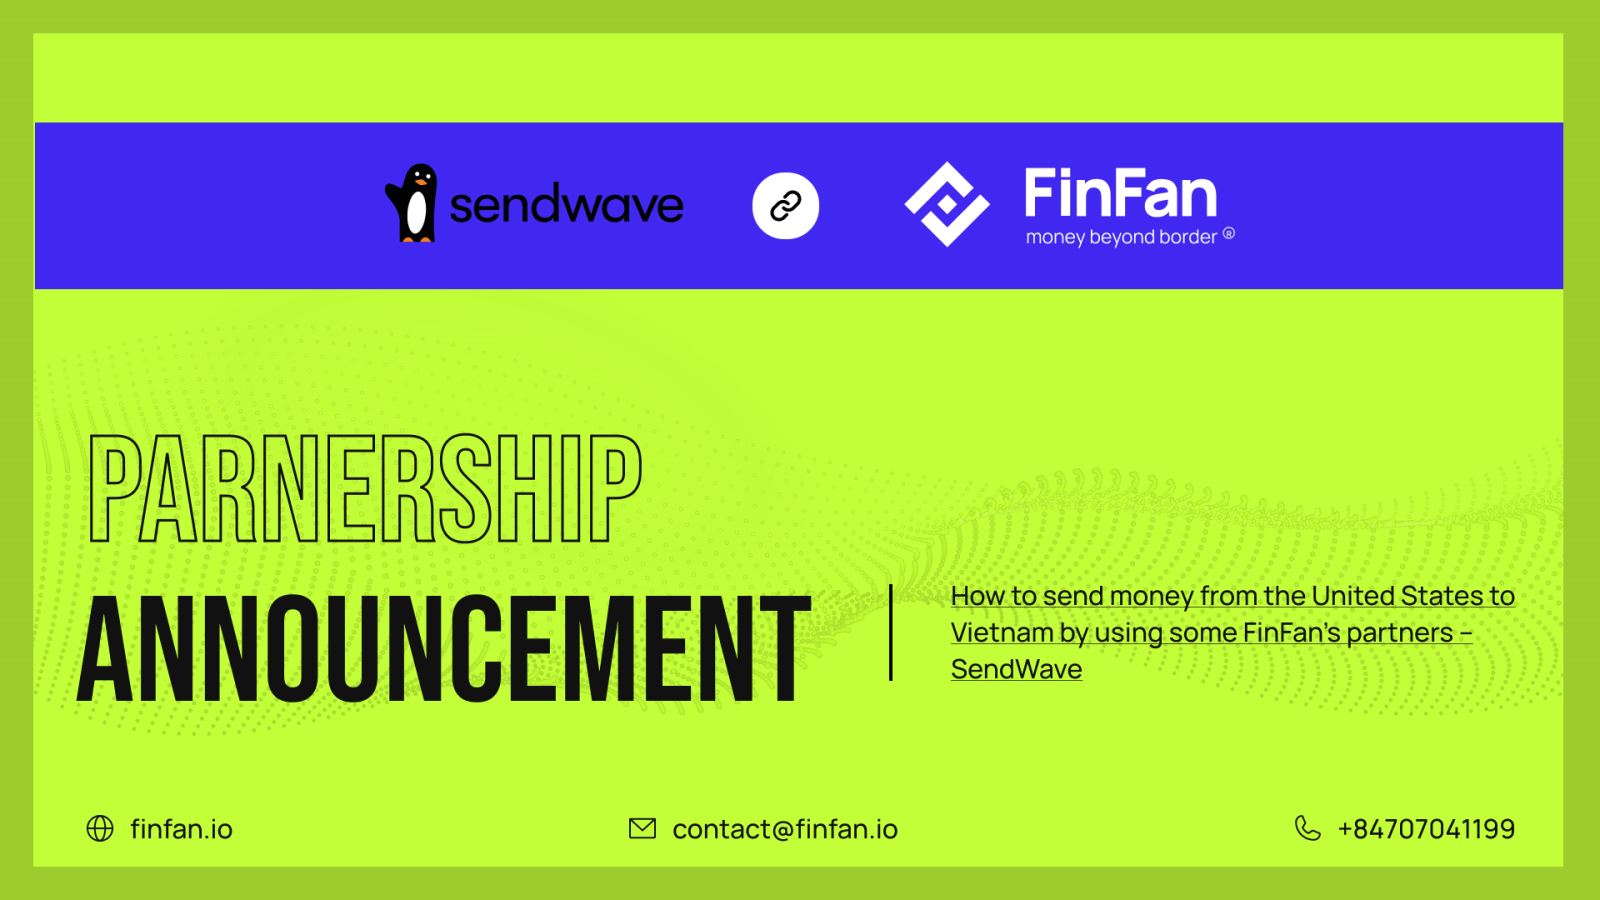 How to send money from the United States to Vietnam by using some FinFan’s partners – SendWave